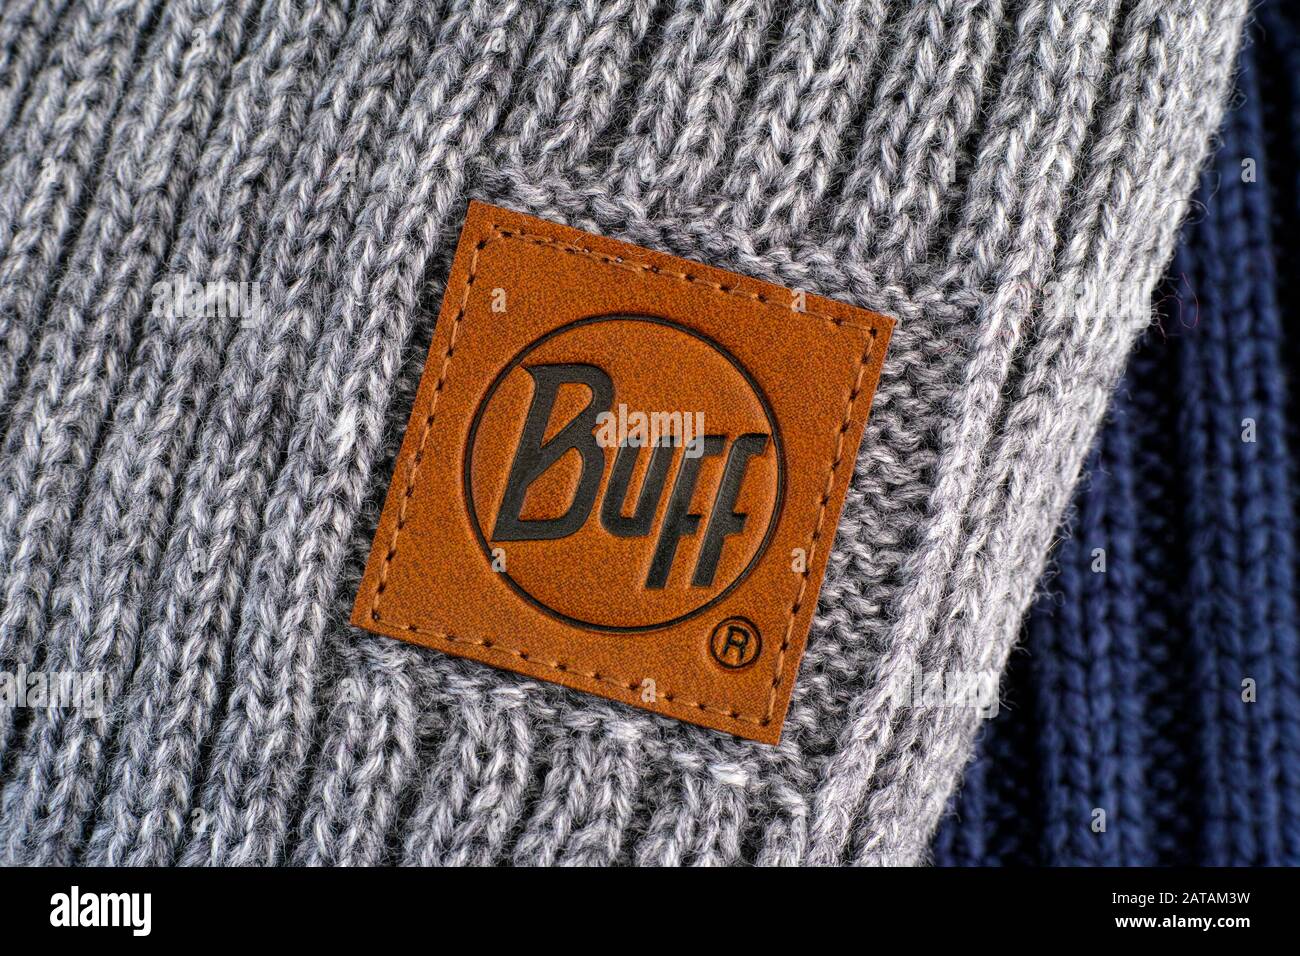 Tambov, Russian Federation - November 16, 2019 Close-up of clothes label Buff on gray knitted hats. Stock Photo